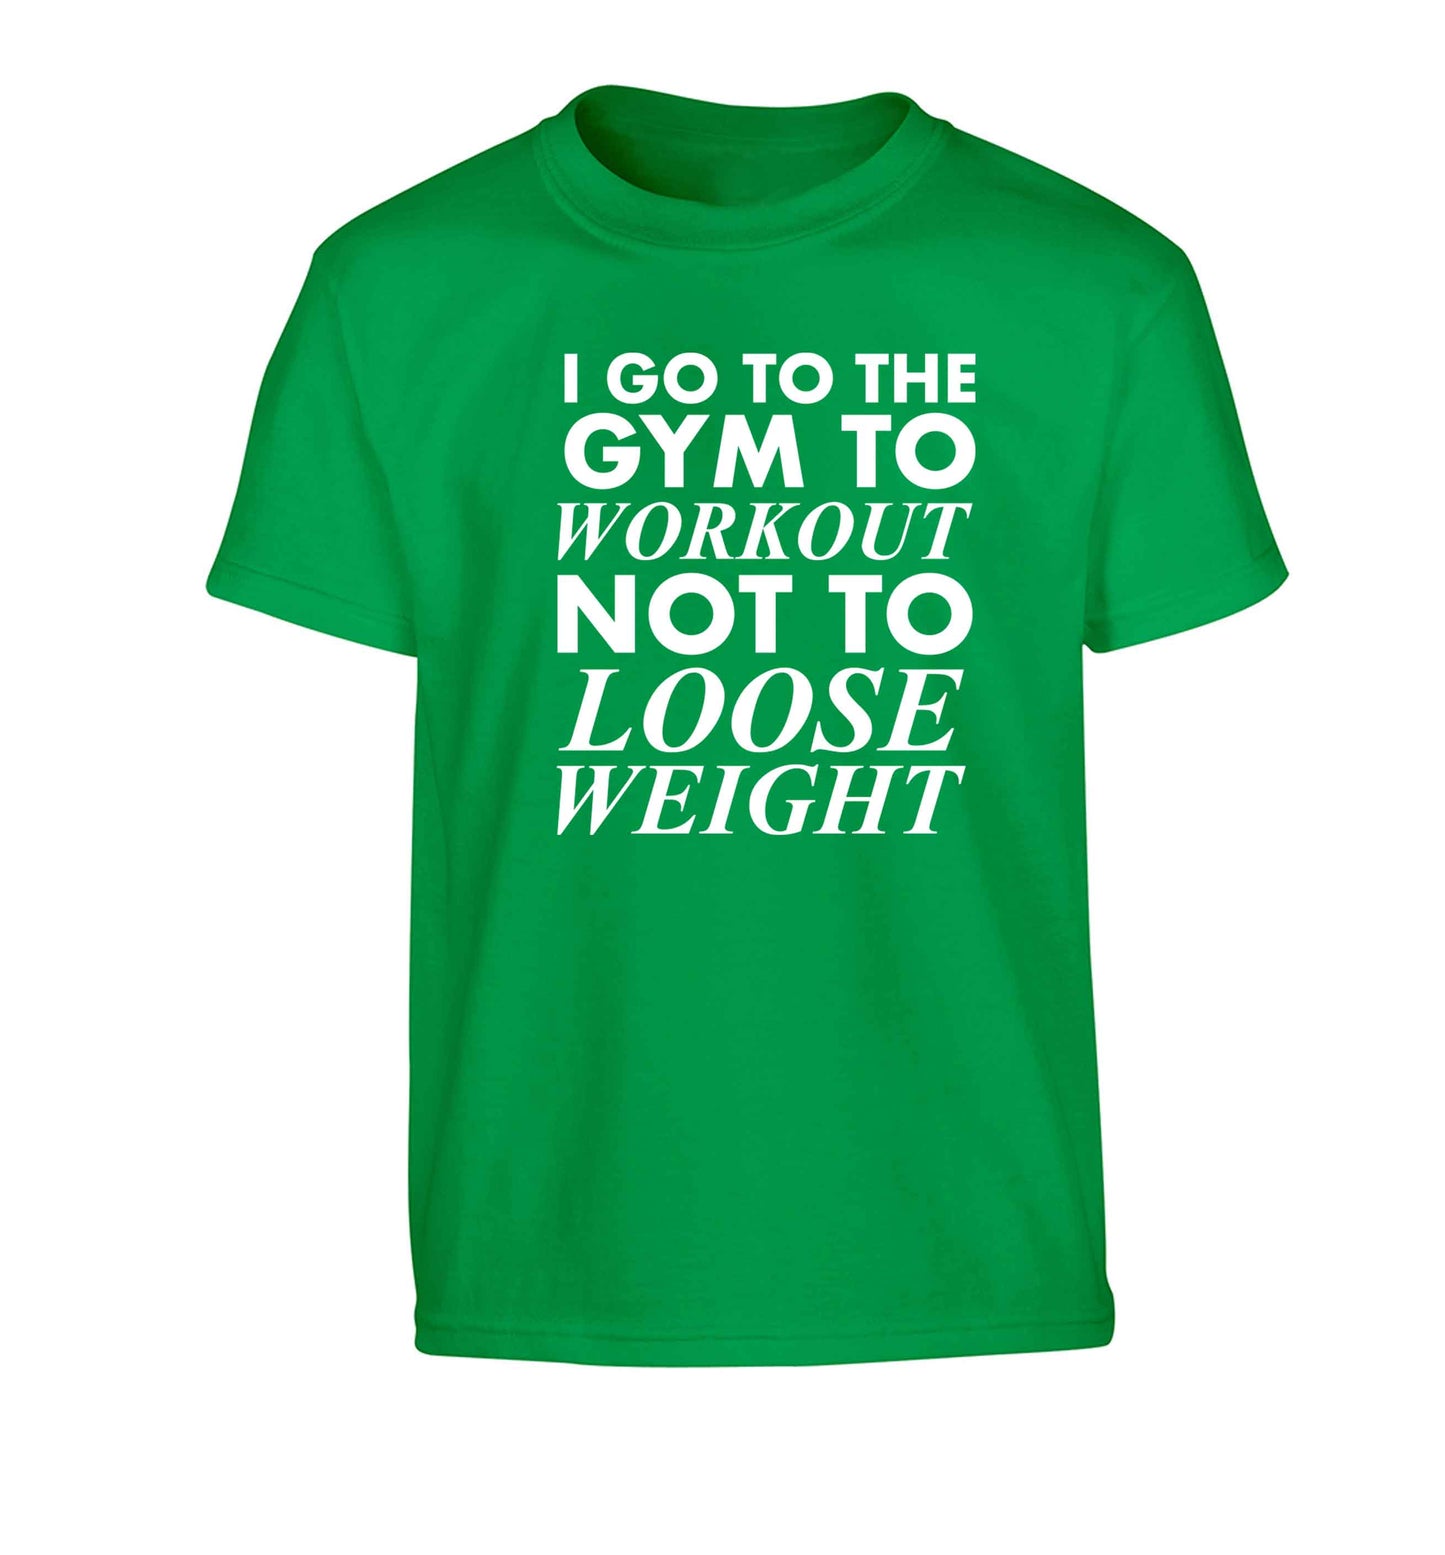 I go to the gym to workout not to loose weight Children's green Tshirt 12-13 Years